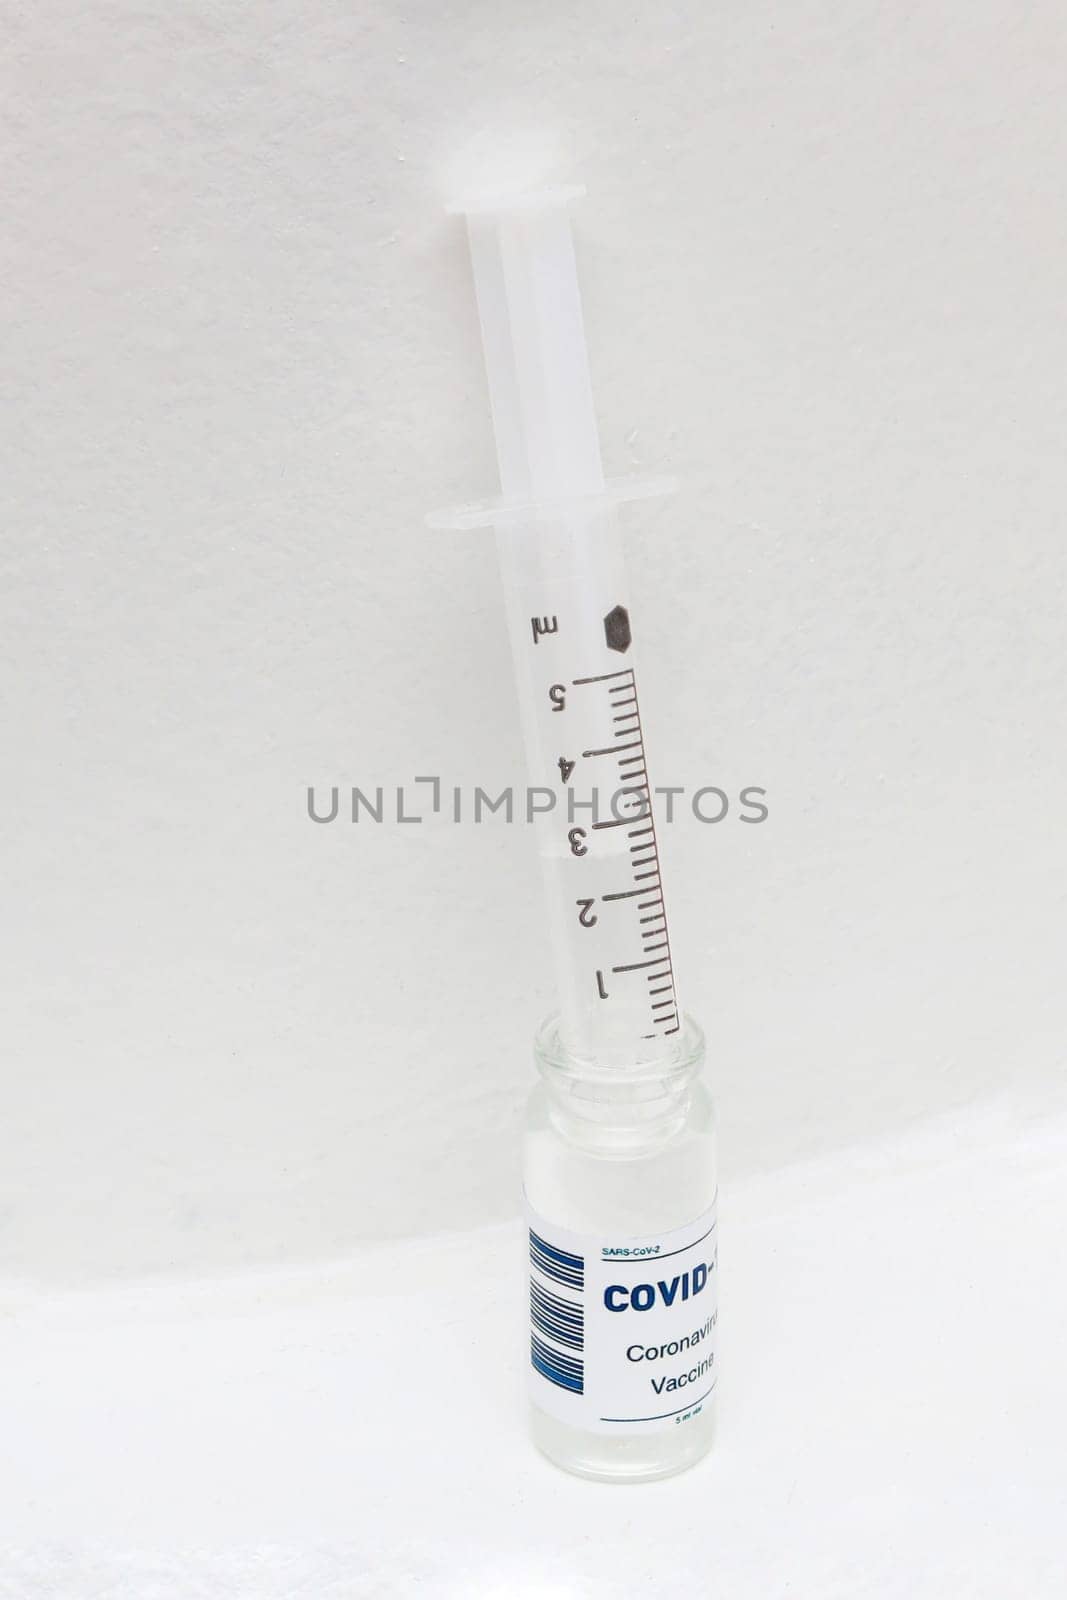 Syringe and ampoule with vaccine on white background. by gelog67